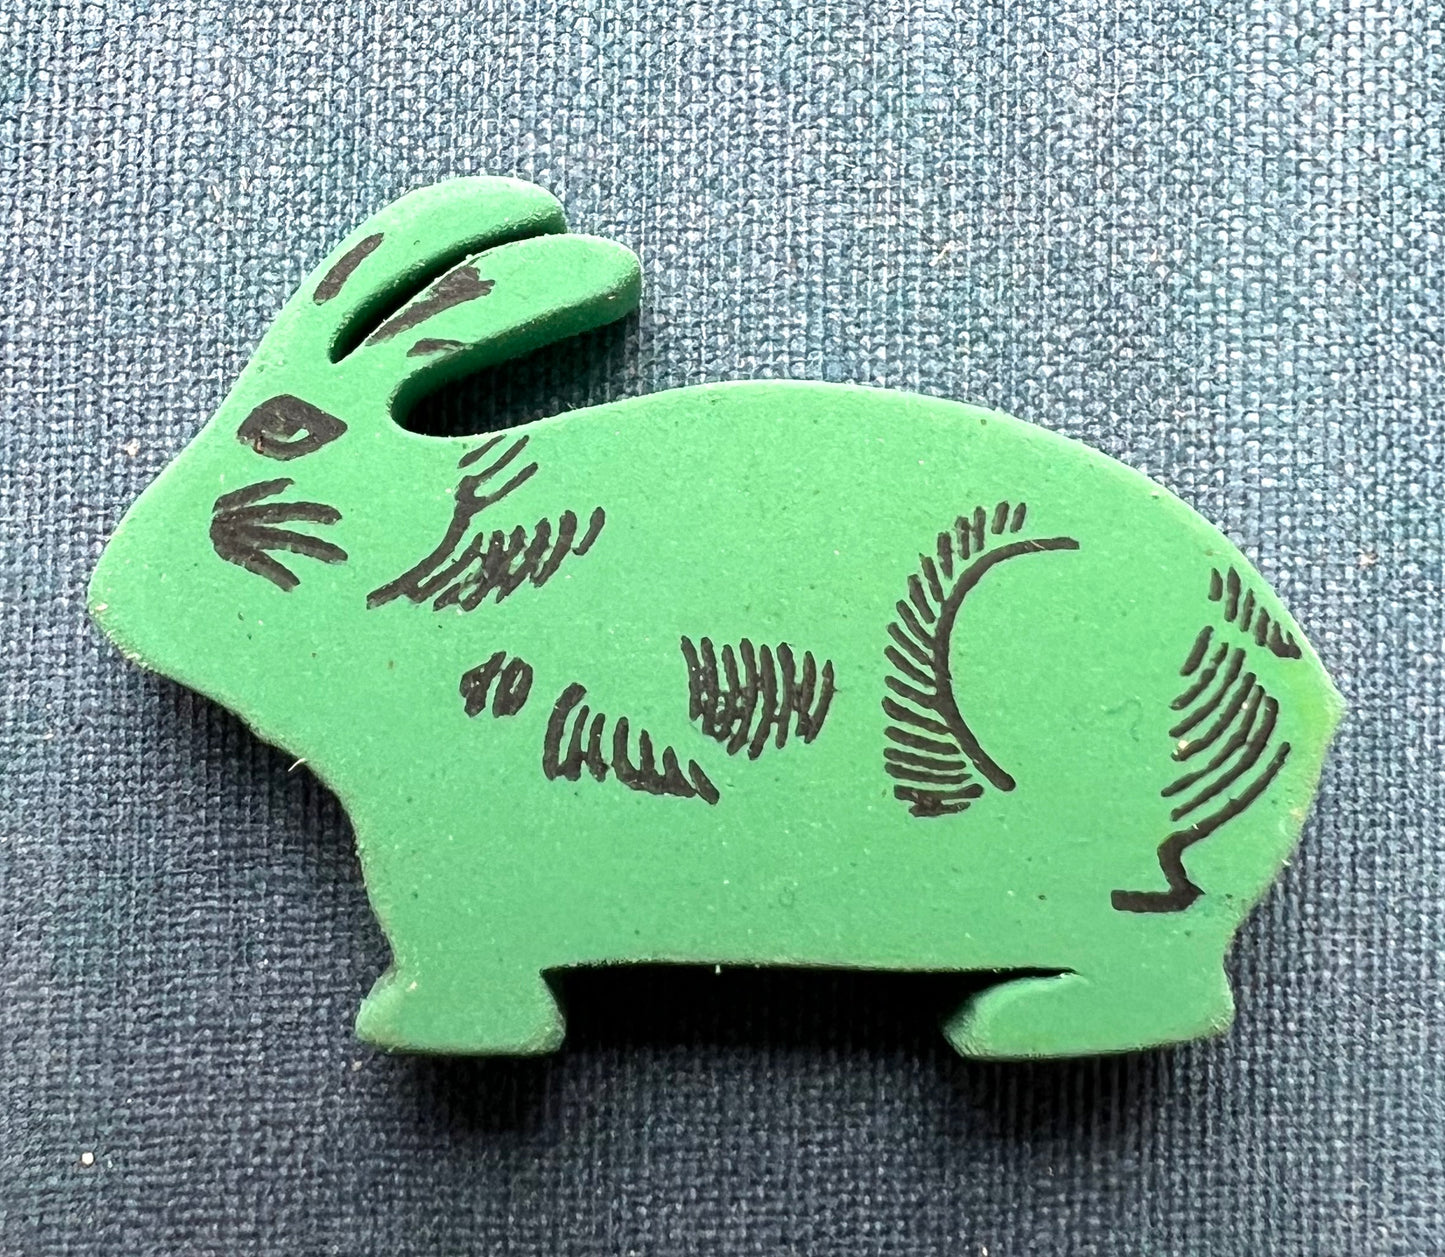 Unused 1950s Rabbit Erasers / Rubbers - Made in Japan